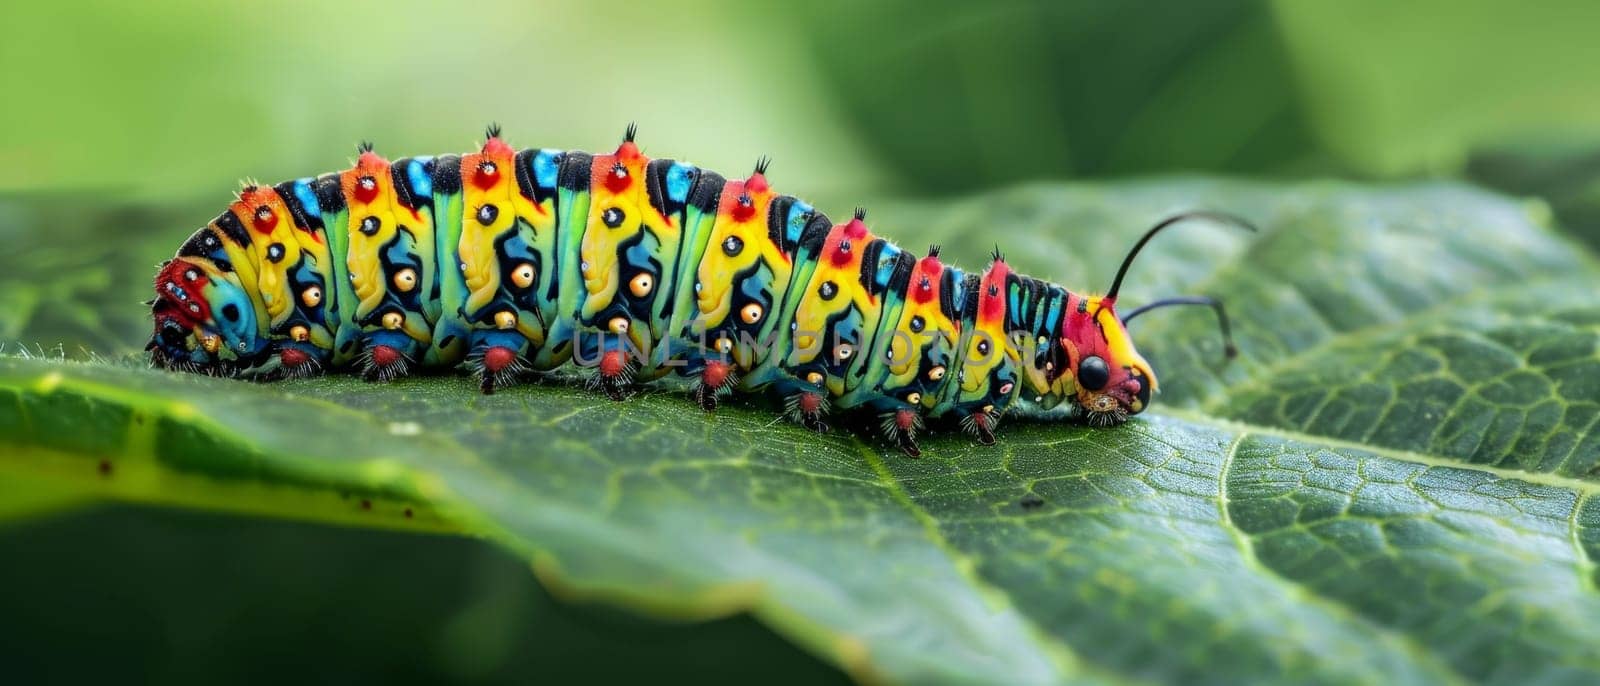 A vivid caterpillar adorned with colorful spots and stripes in a natural setting, a macro photographer's delight. by sfinks